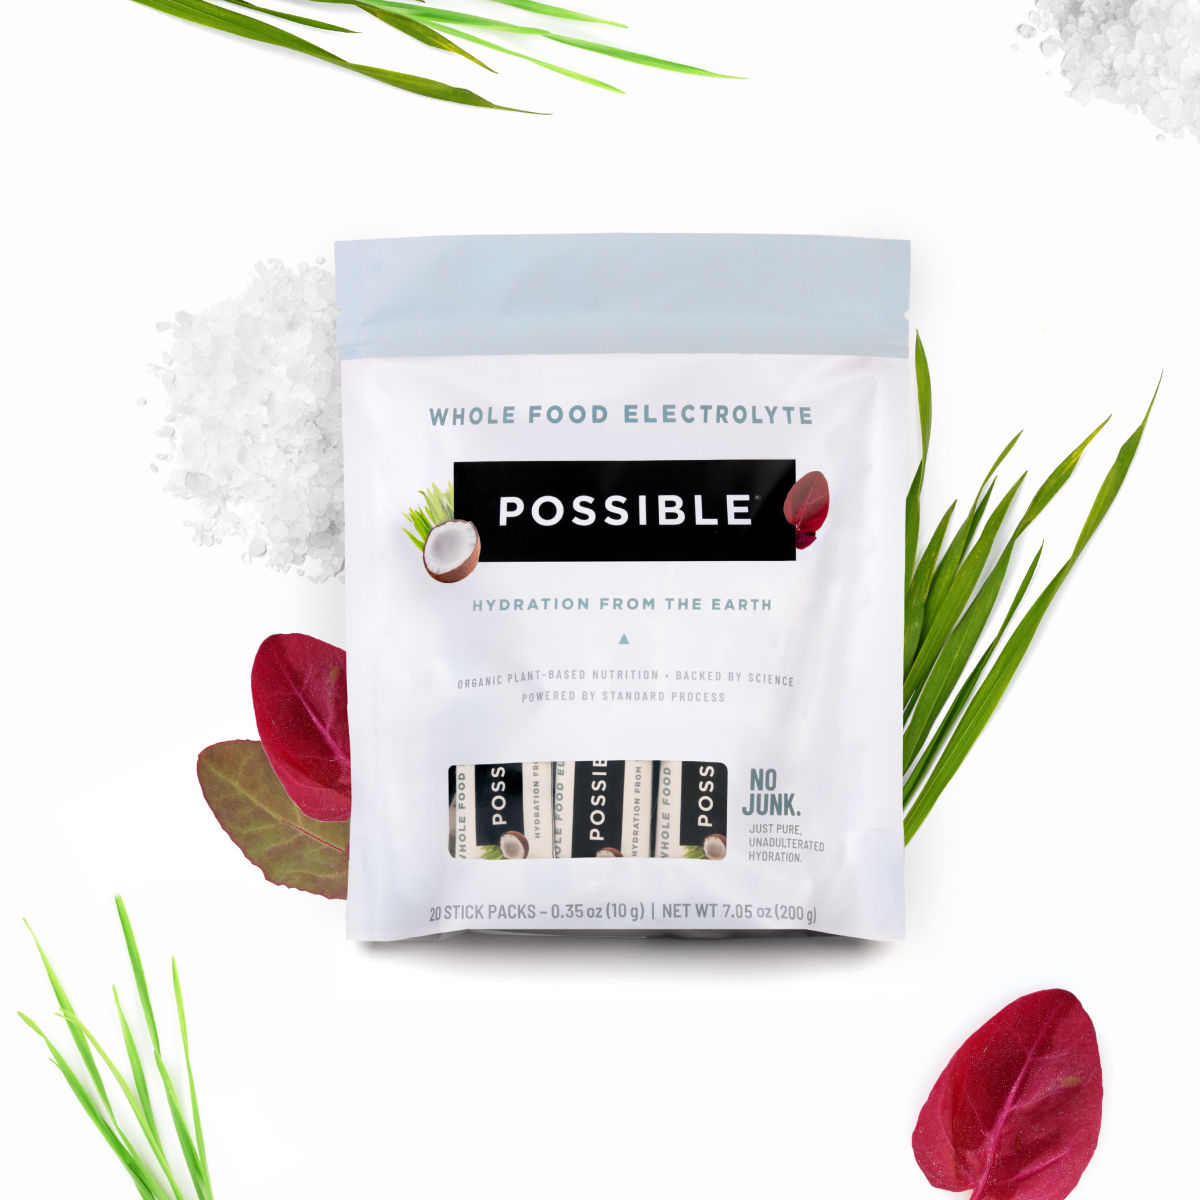 POSSIBLE® Whole Food Electrolyte